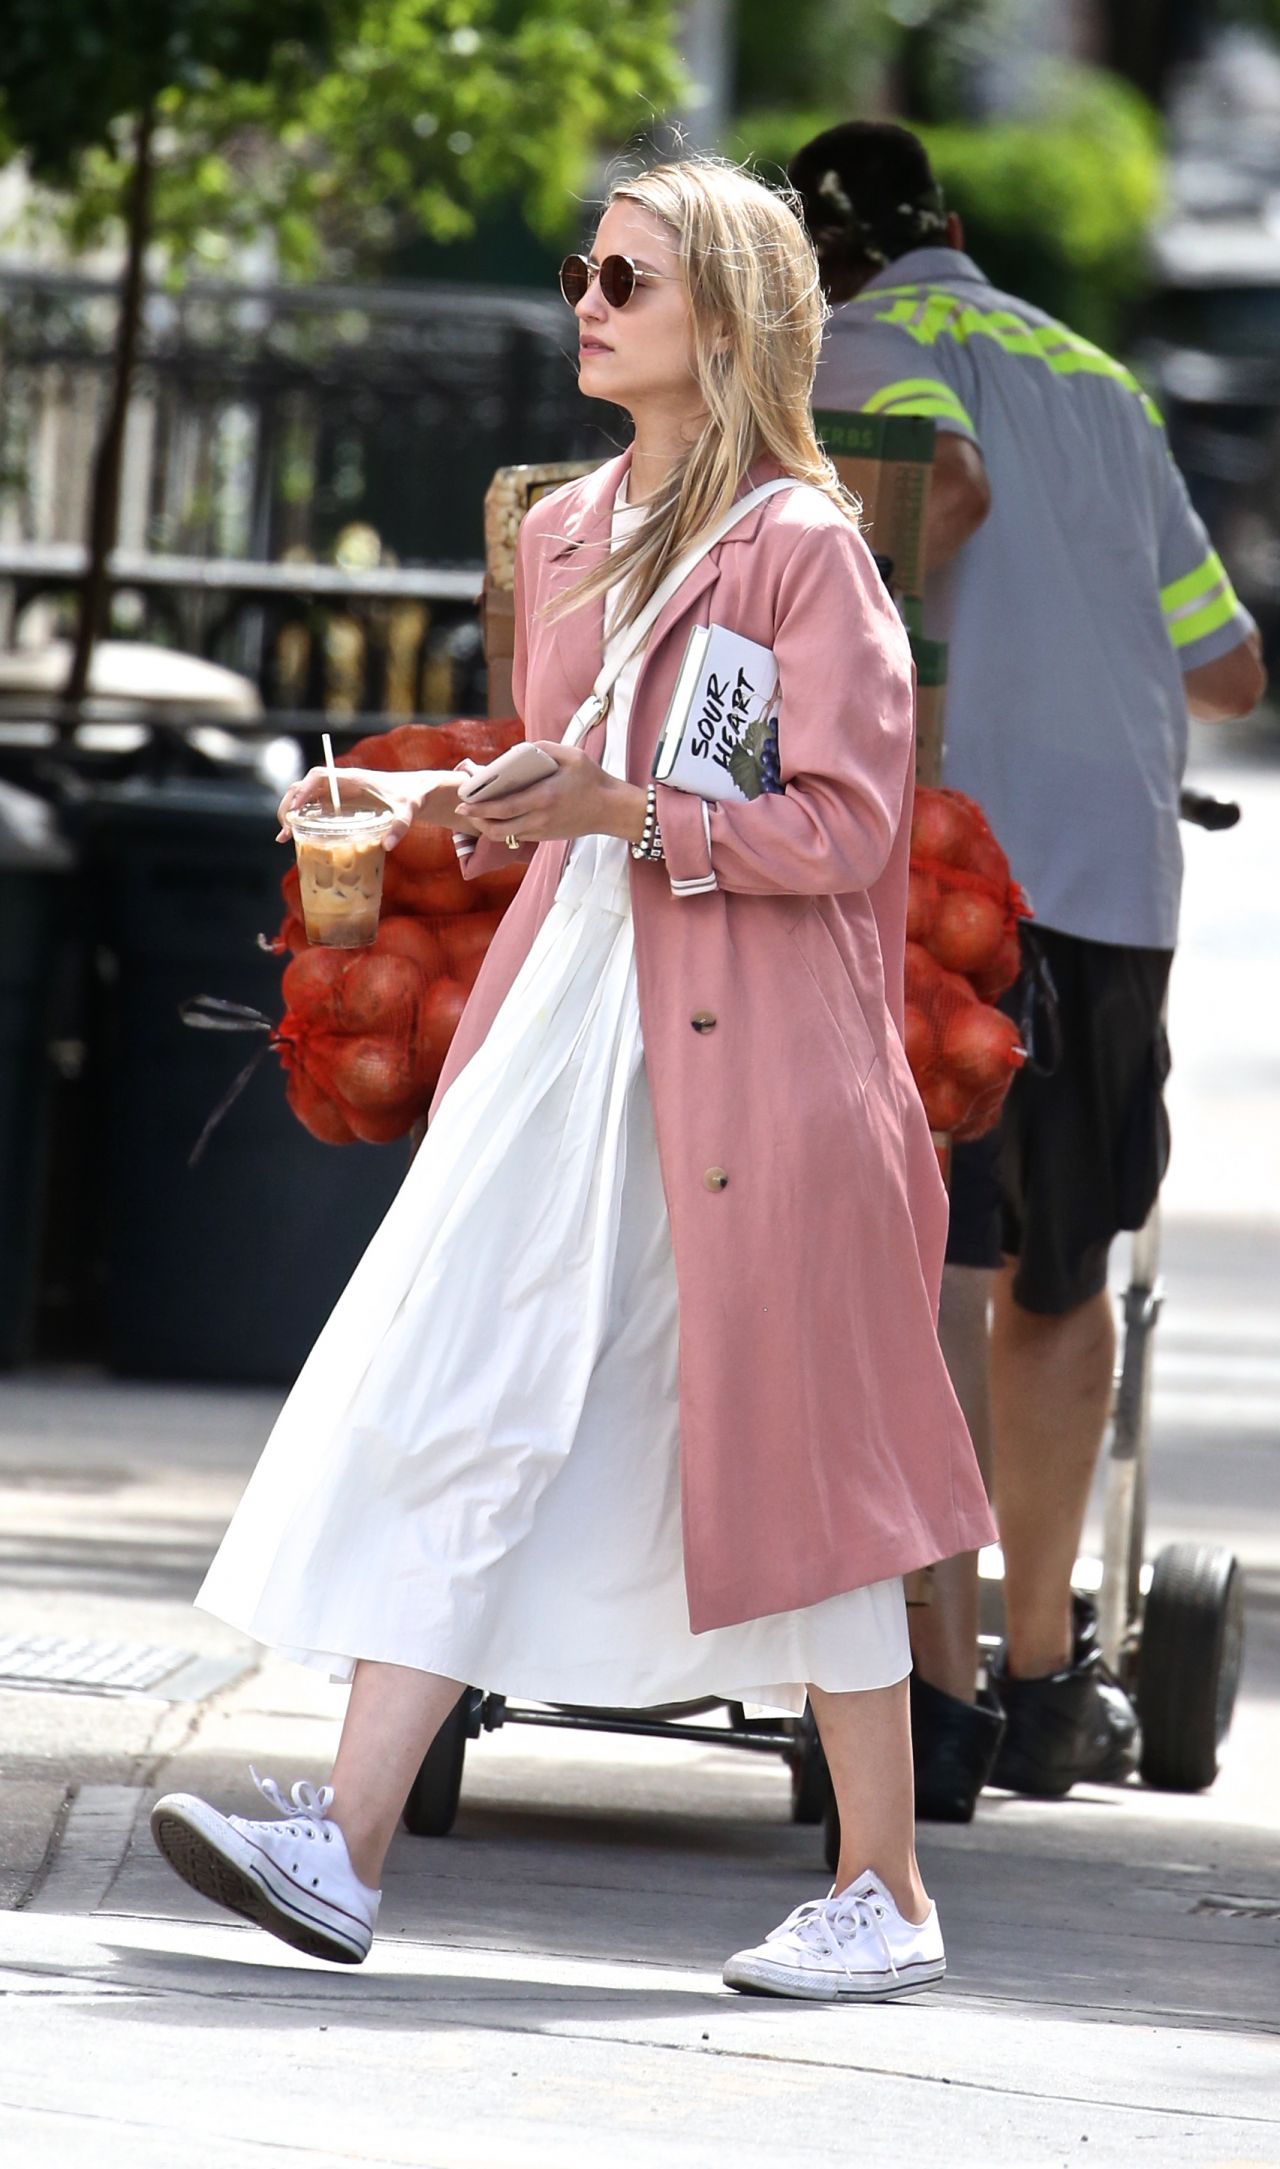 dianna-agron-out-in-new-york-06-15-2018-0.jpg